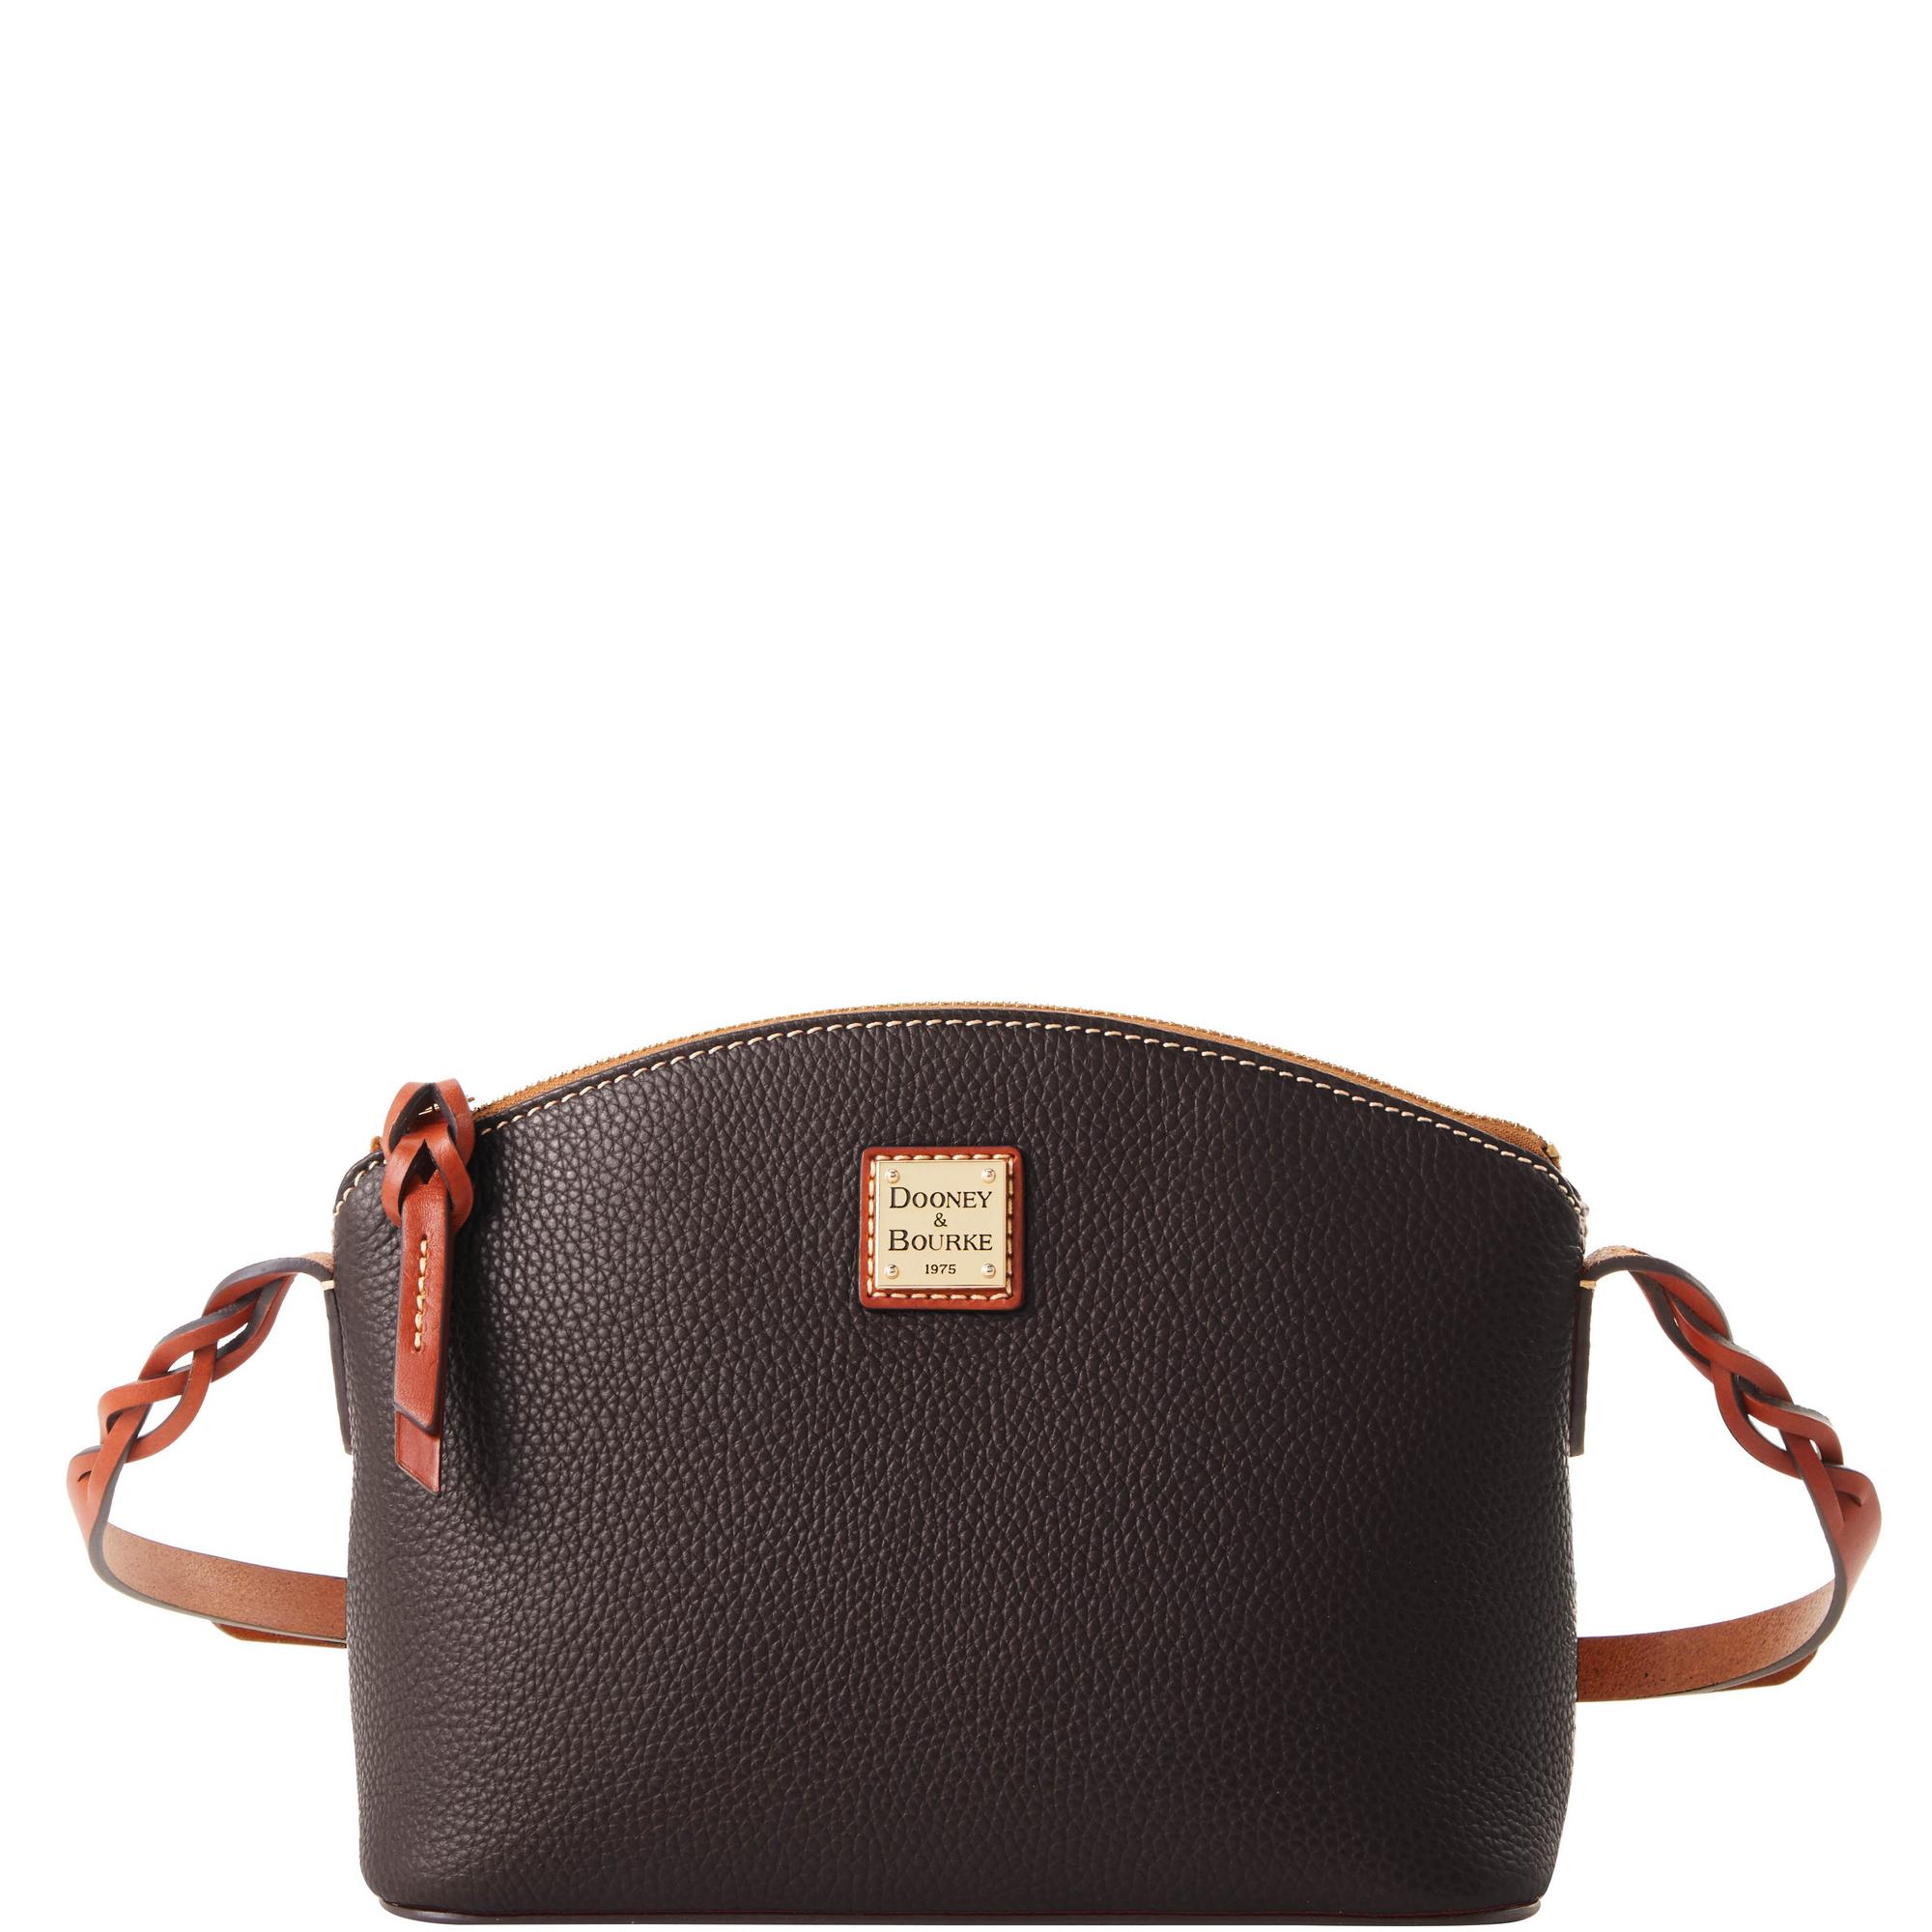 Dooney & Bourke: Up To 50% Off Everything Sale - Pebble Grain Penny Crossbody $95 - Free Ship on orders $119+ or $8